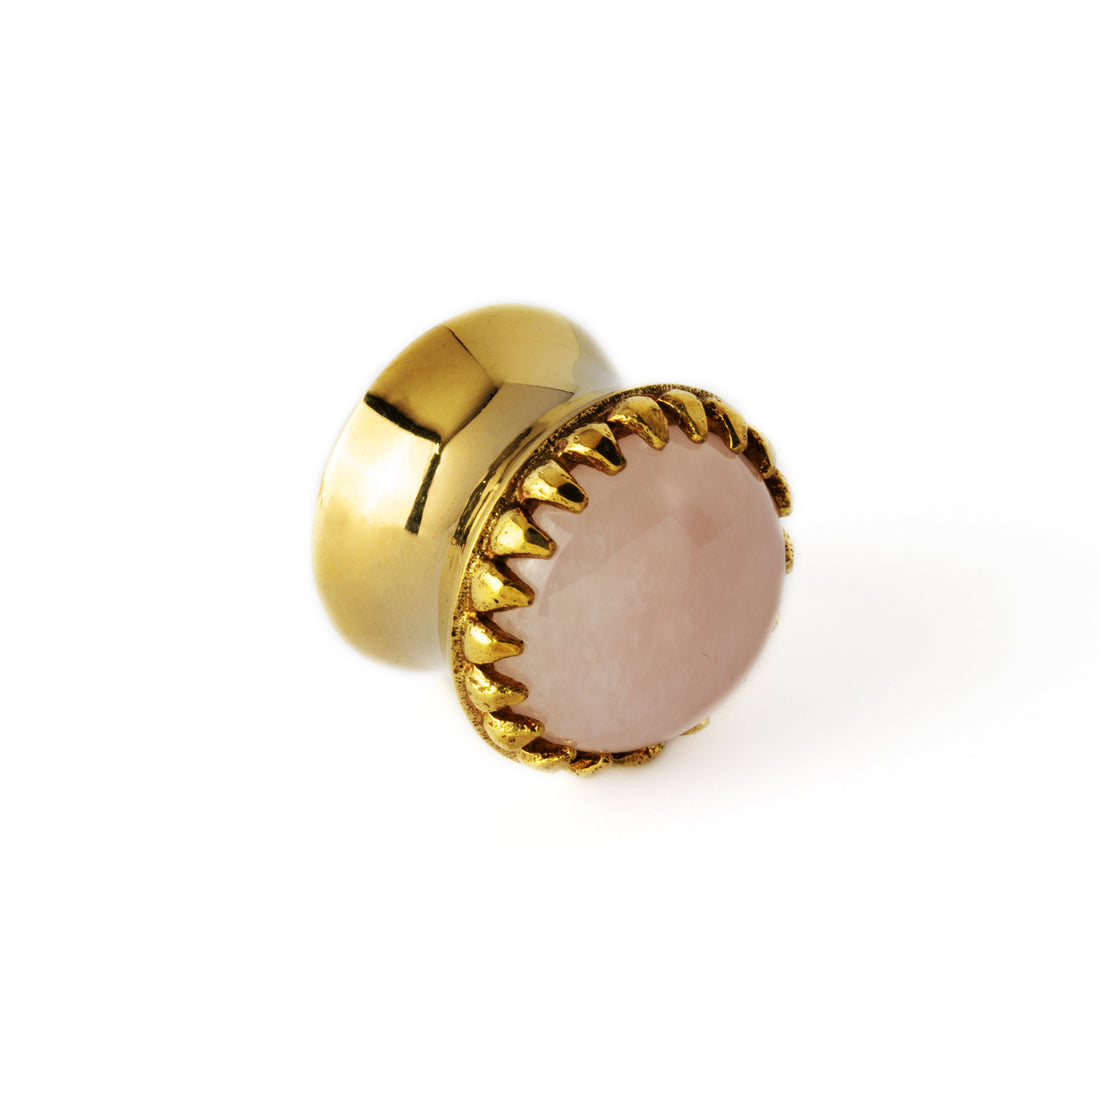 golden ear plug crown shaped with centred rose quartz